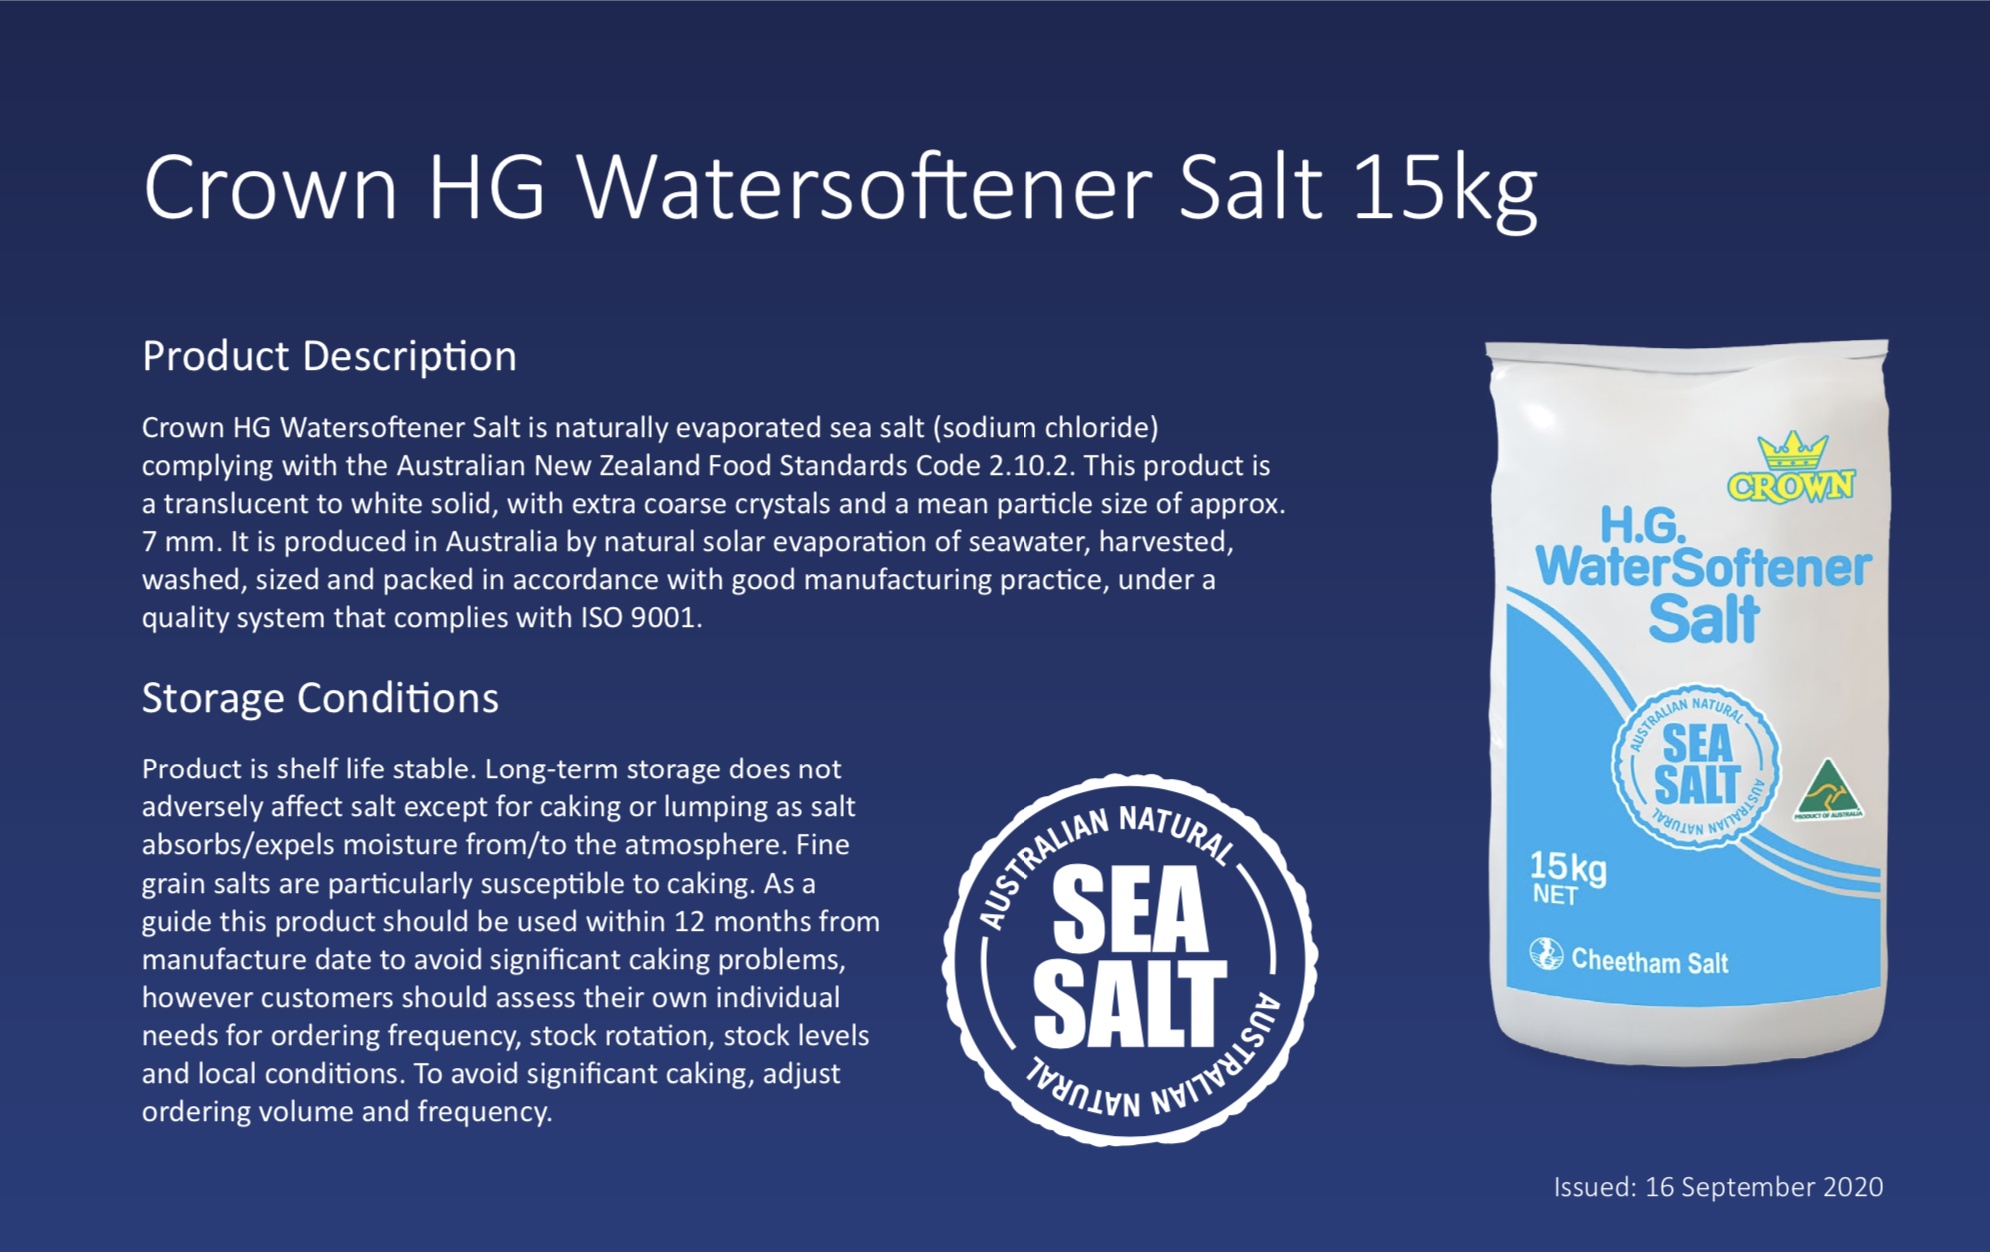 An image of Crown HG Watersoftener Salt product description and storage conditions